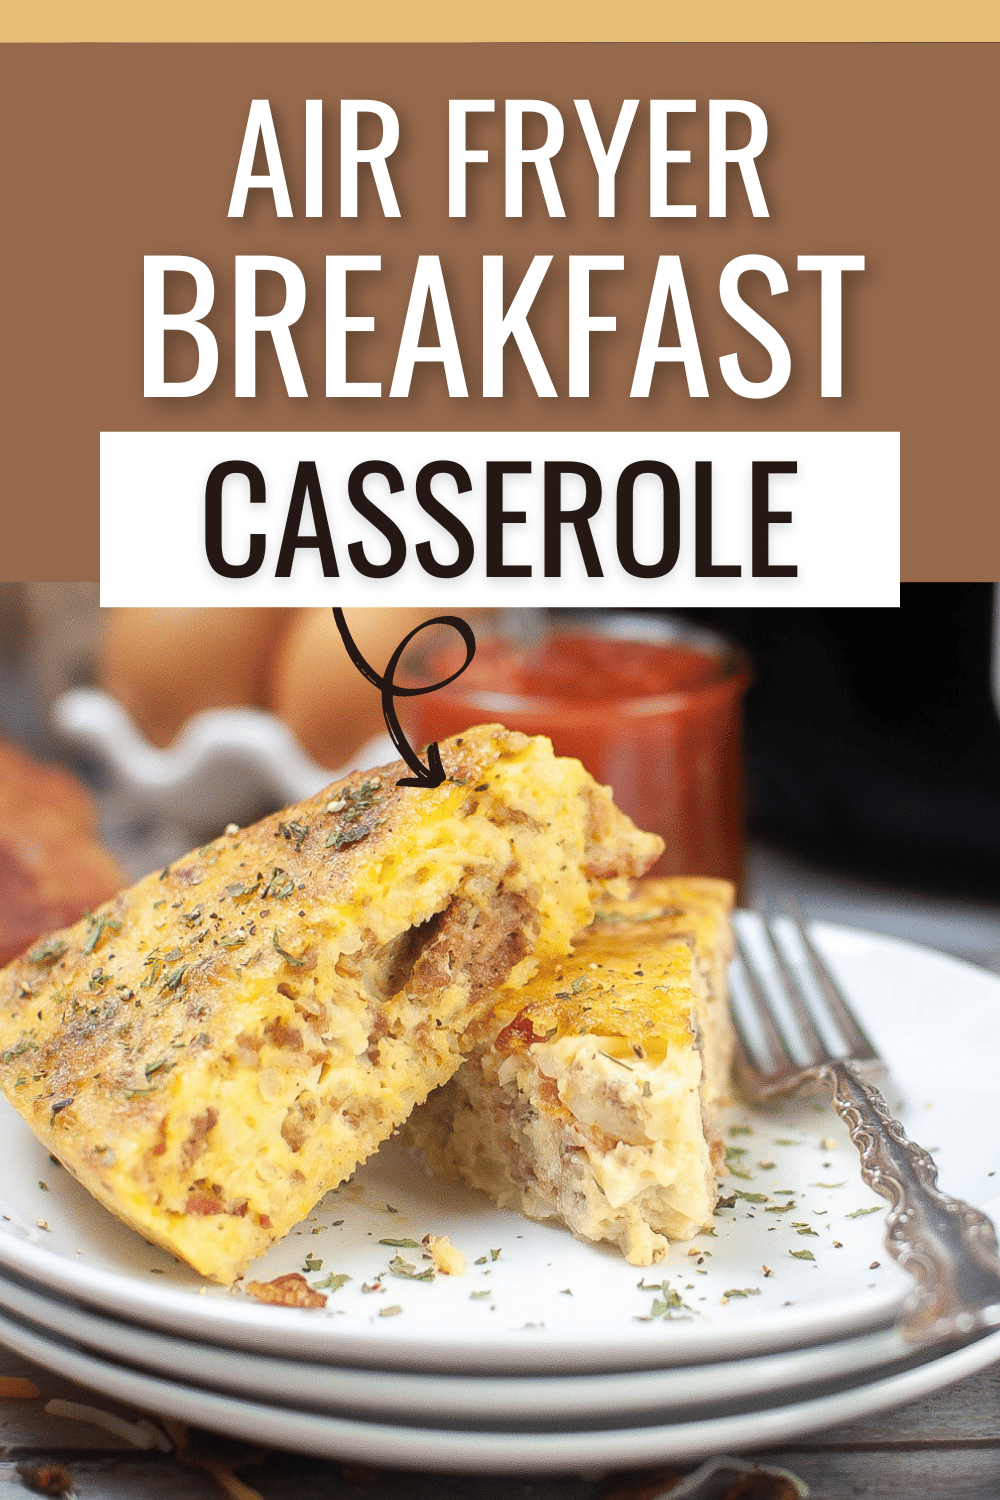 This Air Fryer Breakfast Casserole recipe is easy to make and full of flavor! It’s the perfect dish to feed a crowd for brunch or breakfast. #airfryer #breakfastcasserole #breakfastrecipe #brunch via @wondermomwannab